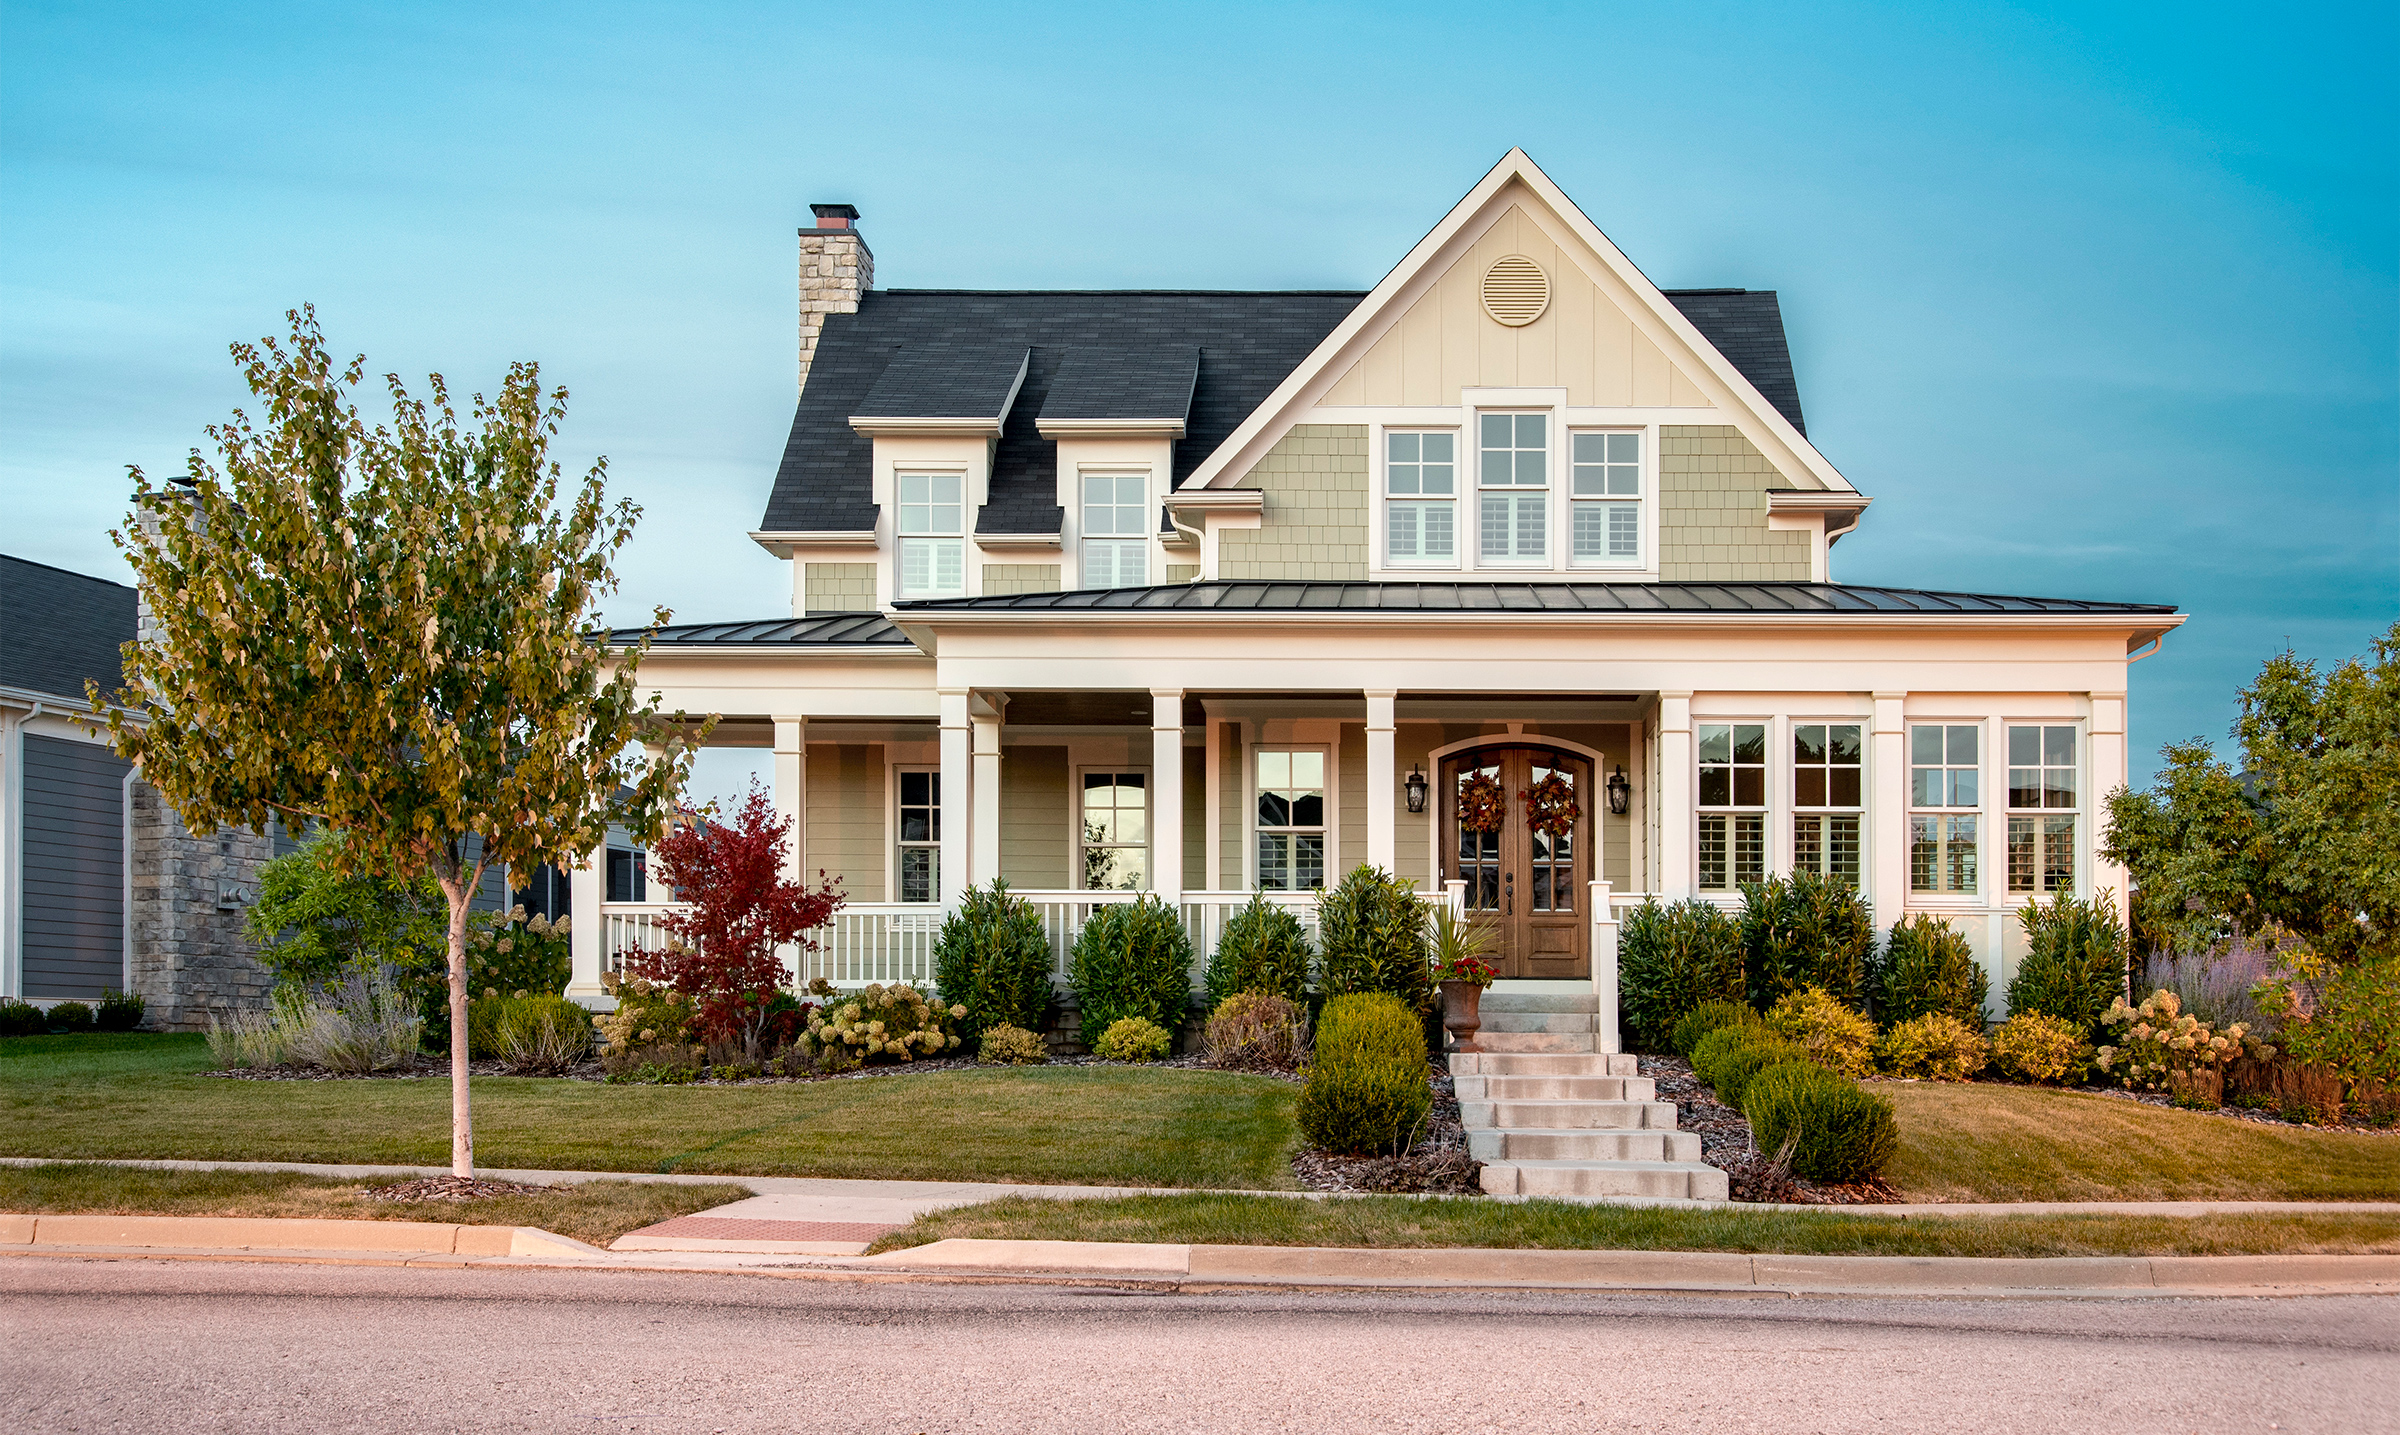 Why James Hardie Is the Best Choice for Low-Maintenance Siding